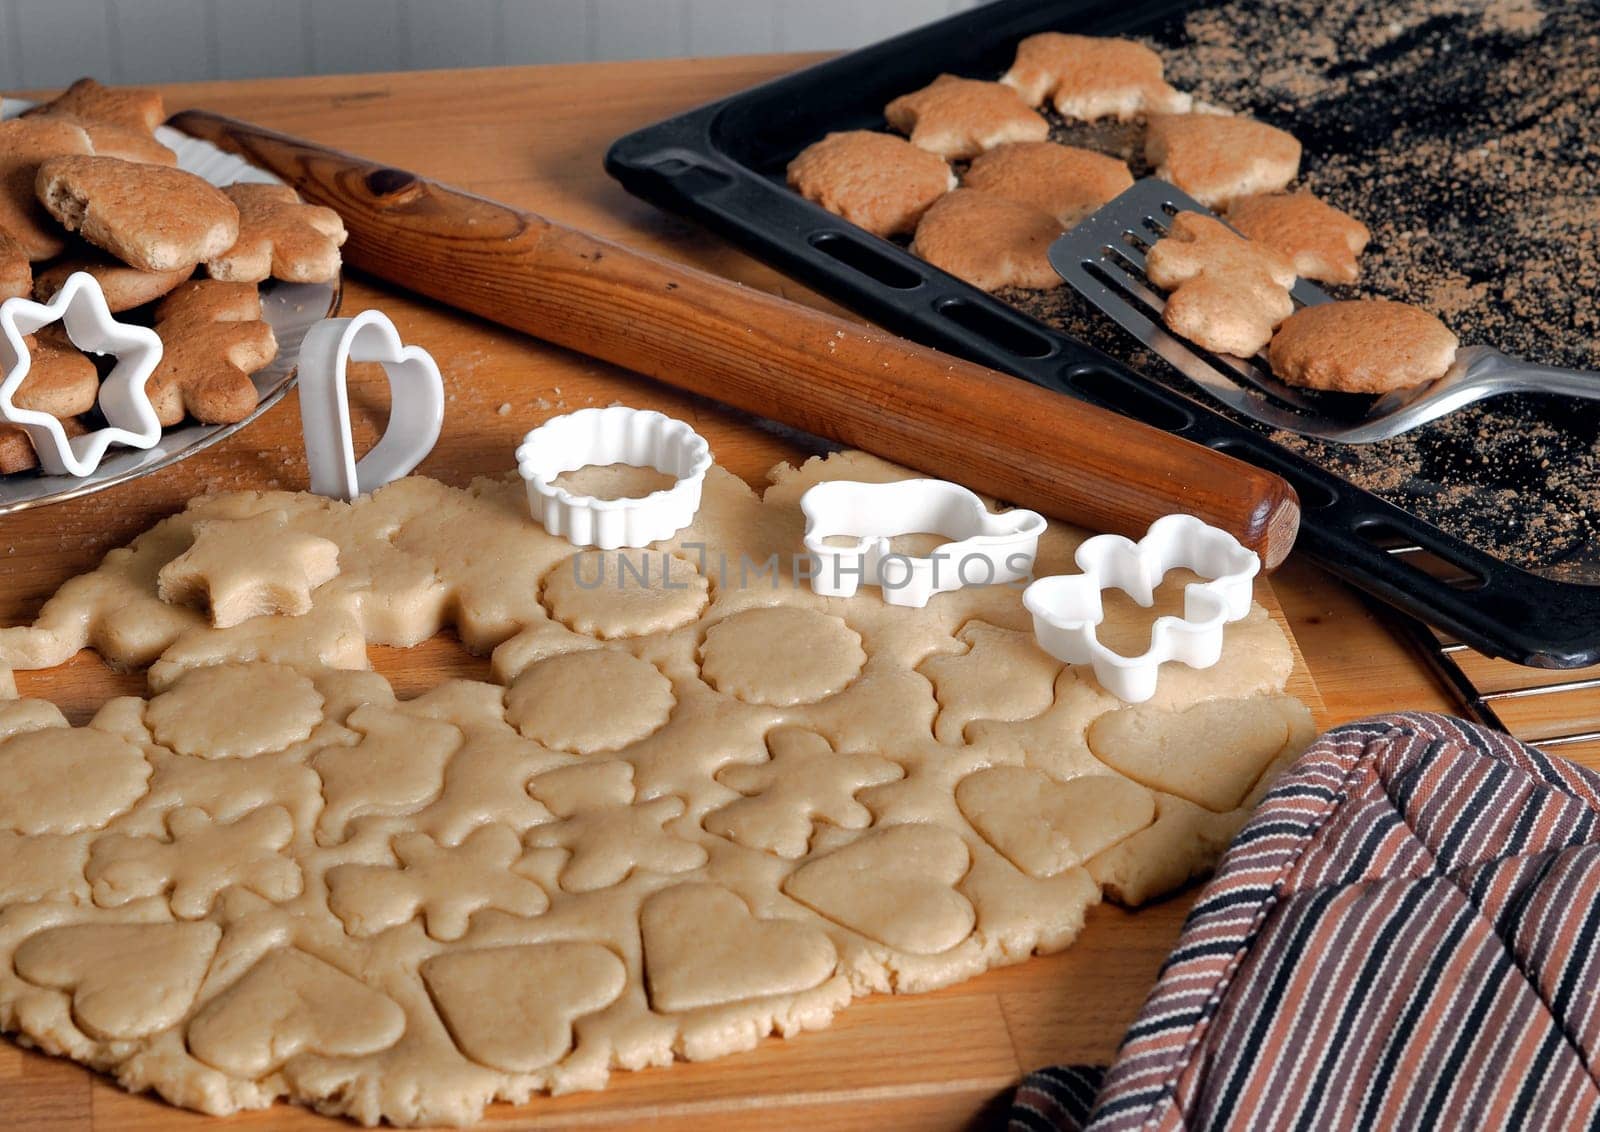 Food background with homemade cookies. The process of making cookies in the kitchen with dough and molds. The concept of fresh baking and healthy homemade food.